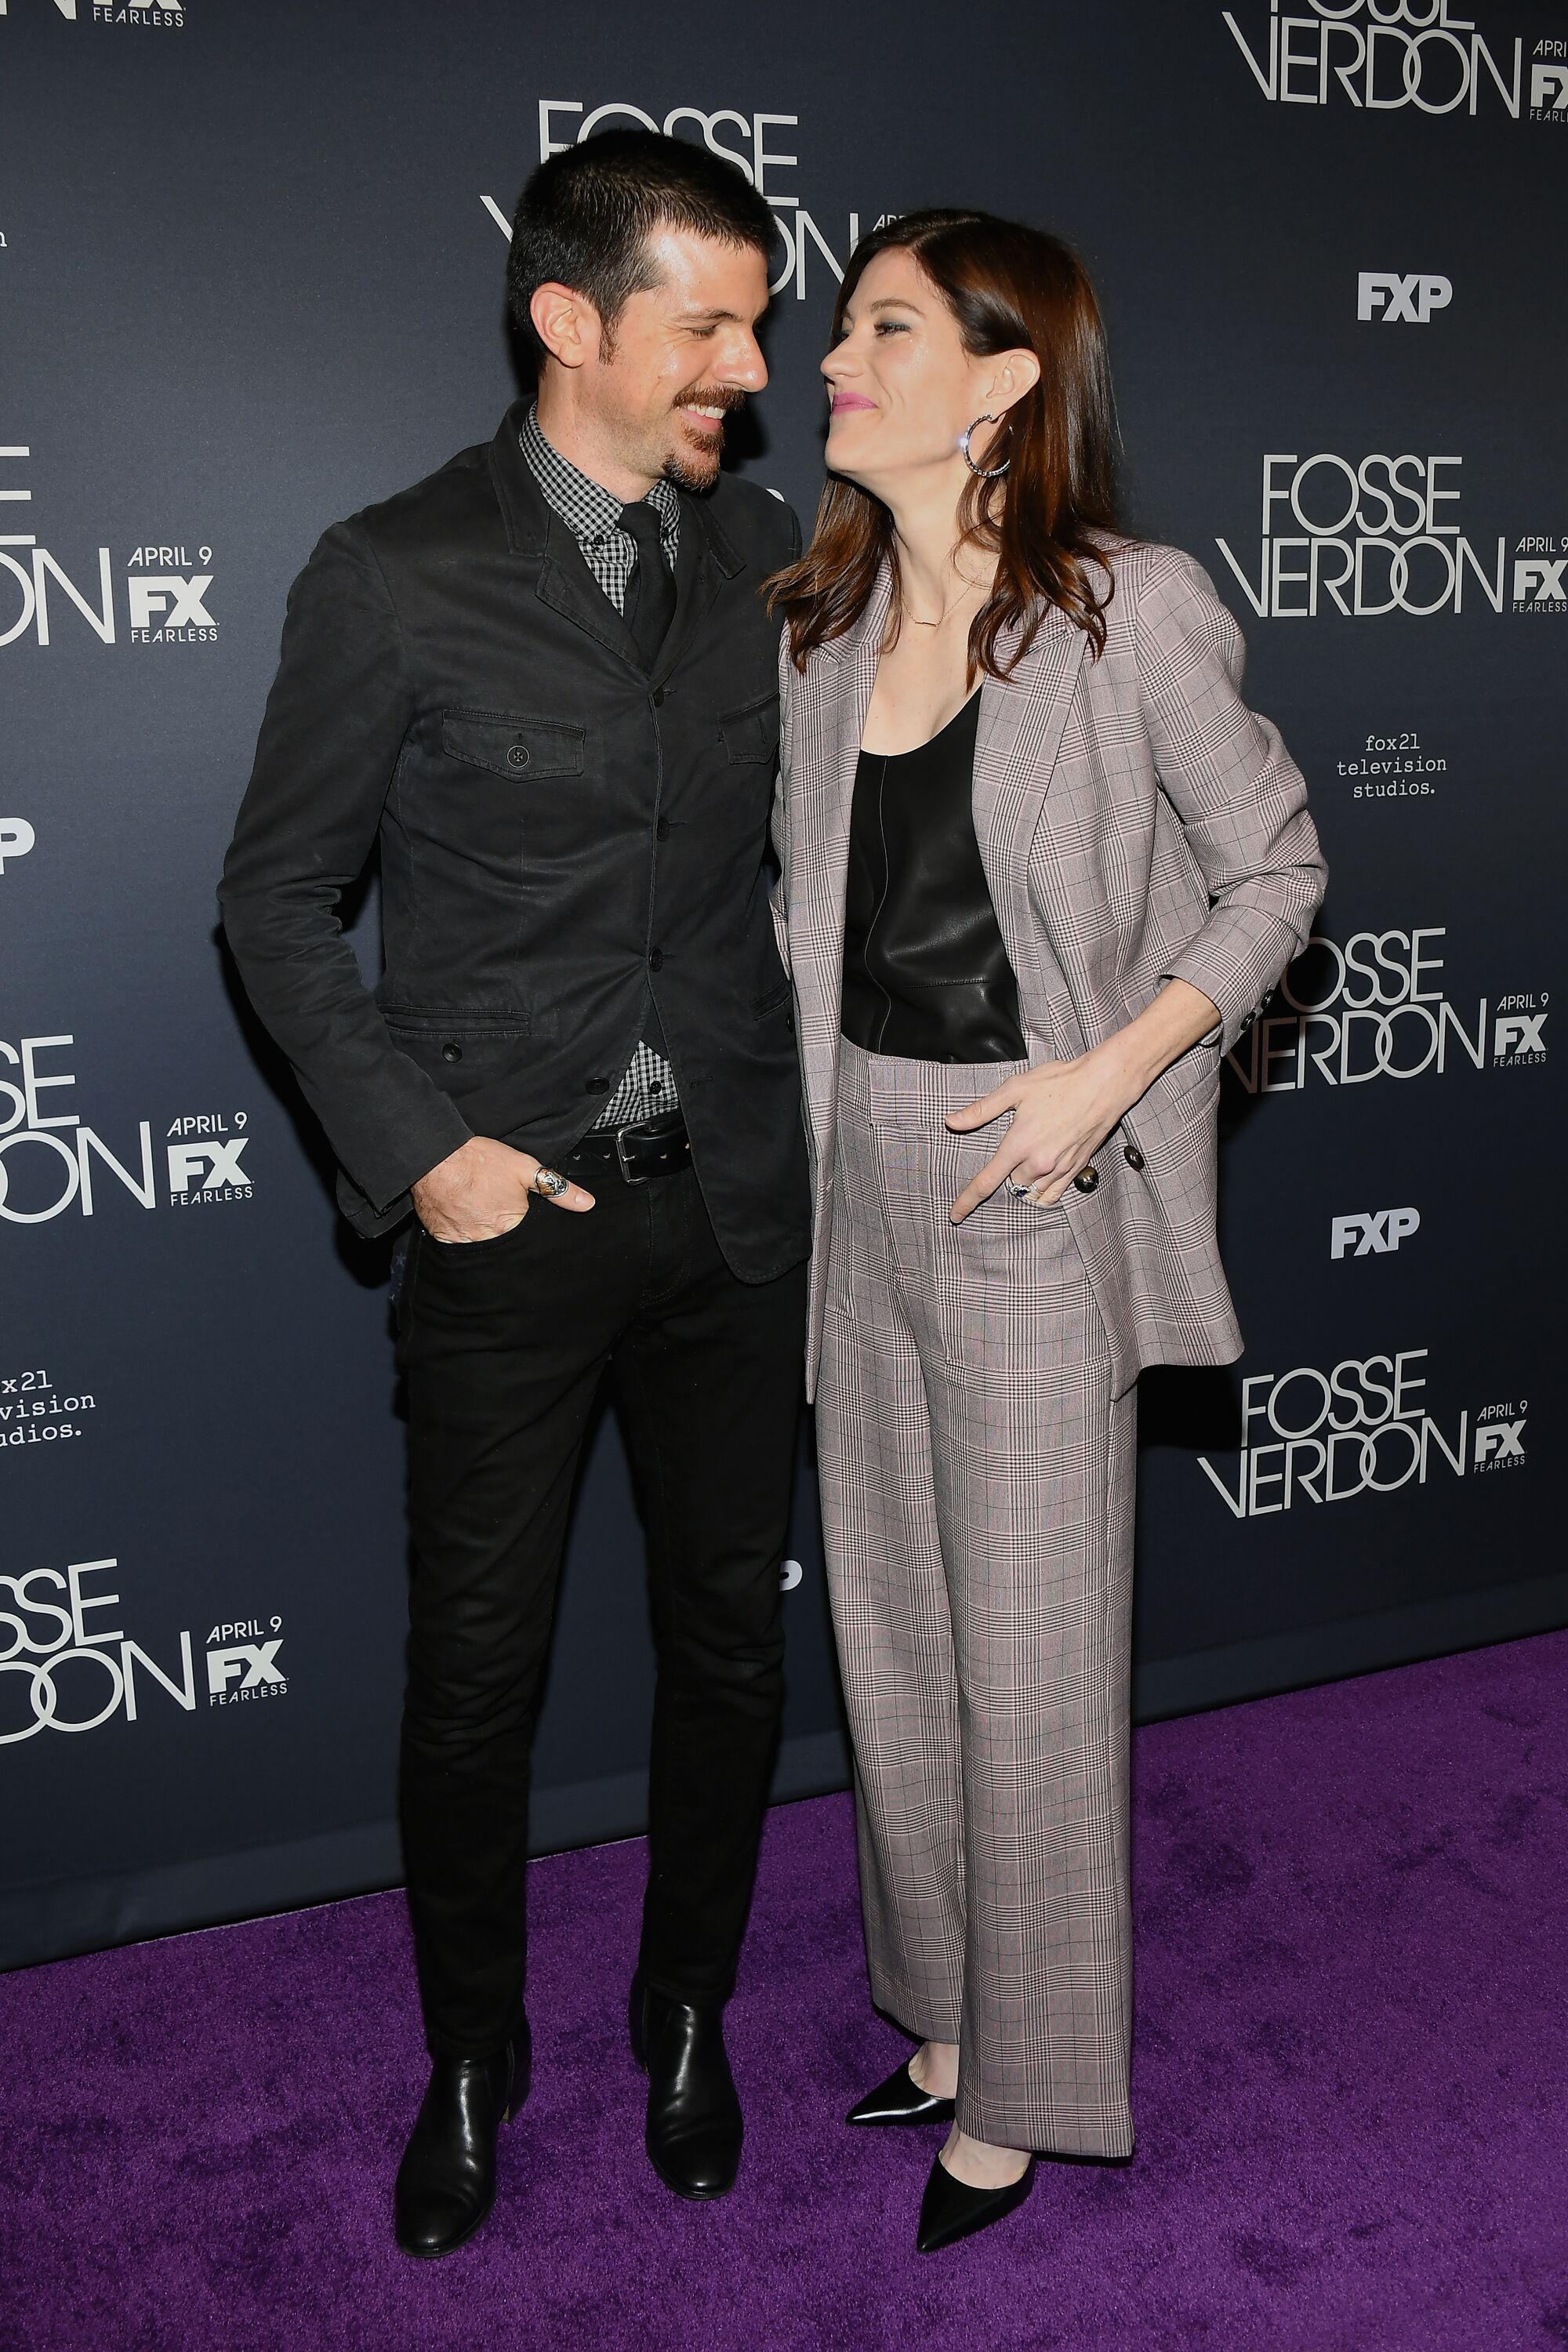 Seth Avett and Jennifer Carpenter attend the New York Premiere for FX's "Fosse/Verdon" on April 08, 2019 in New York City. | Source: Getty Images